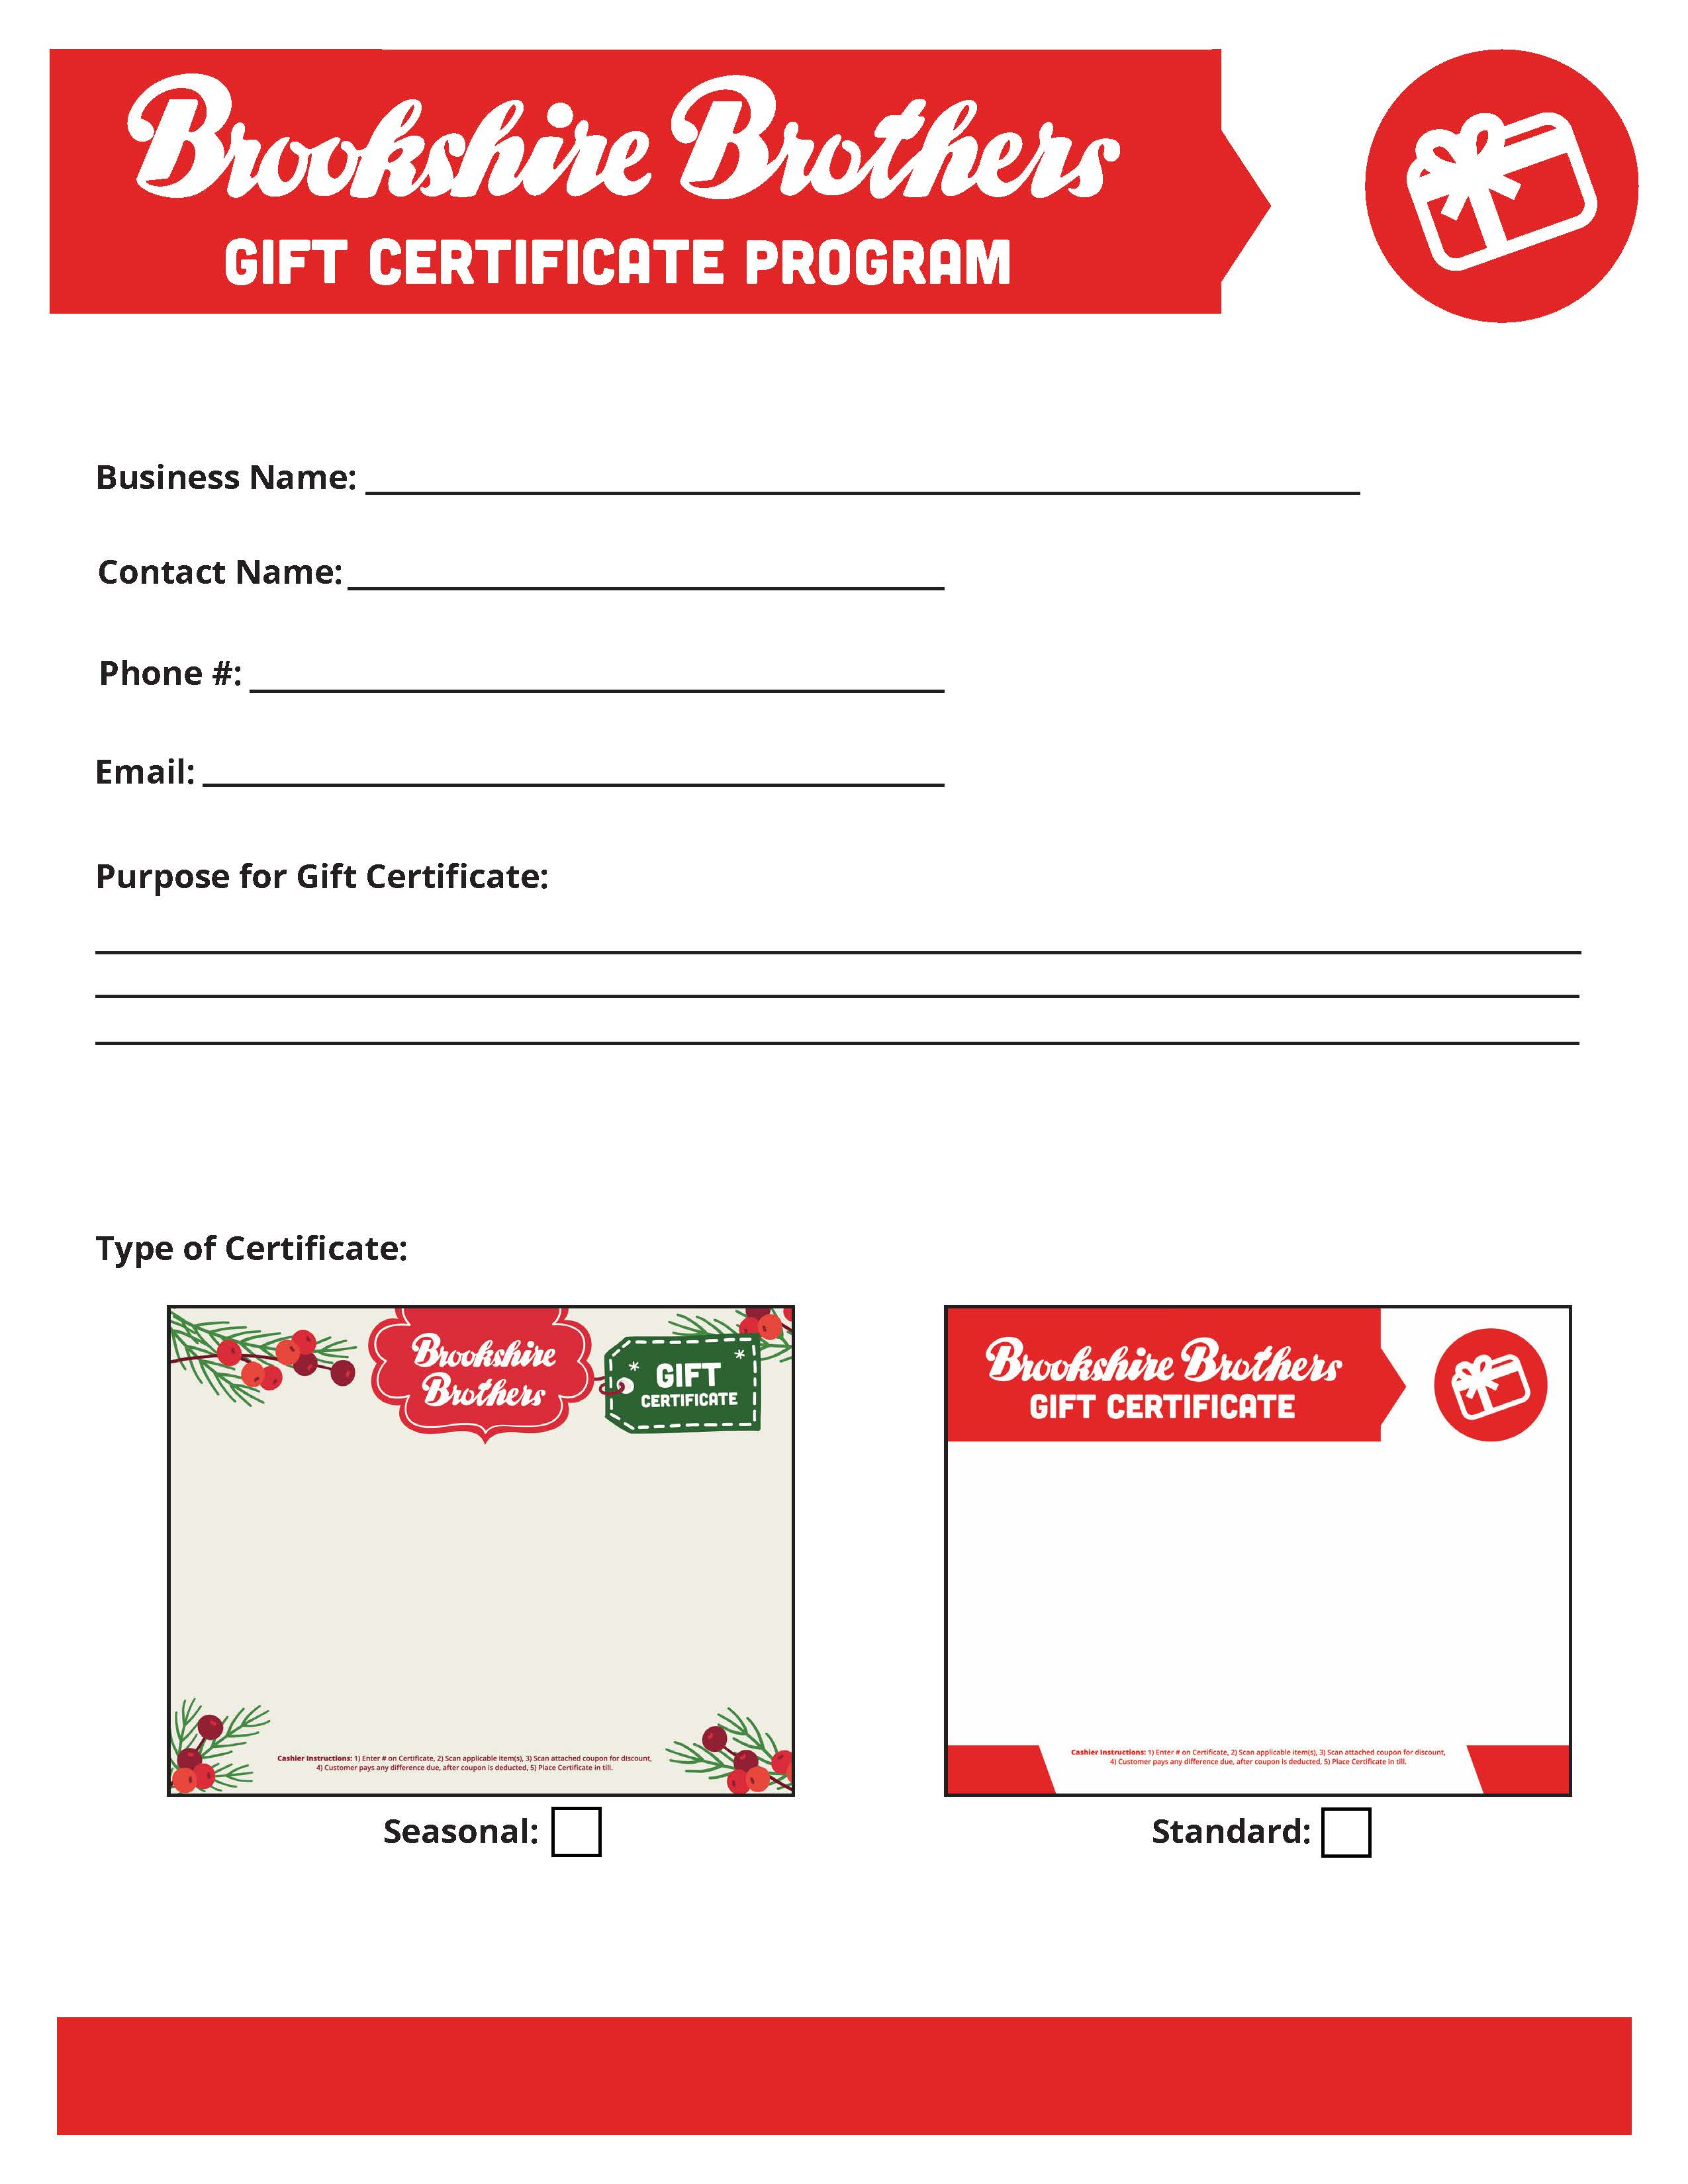 Gift Certificate Information Form